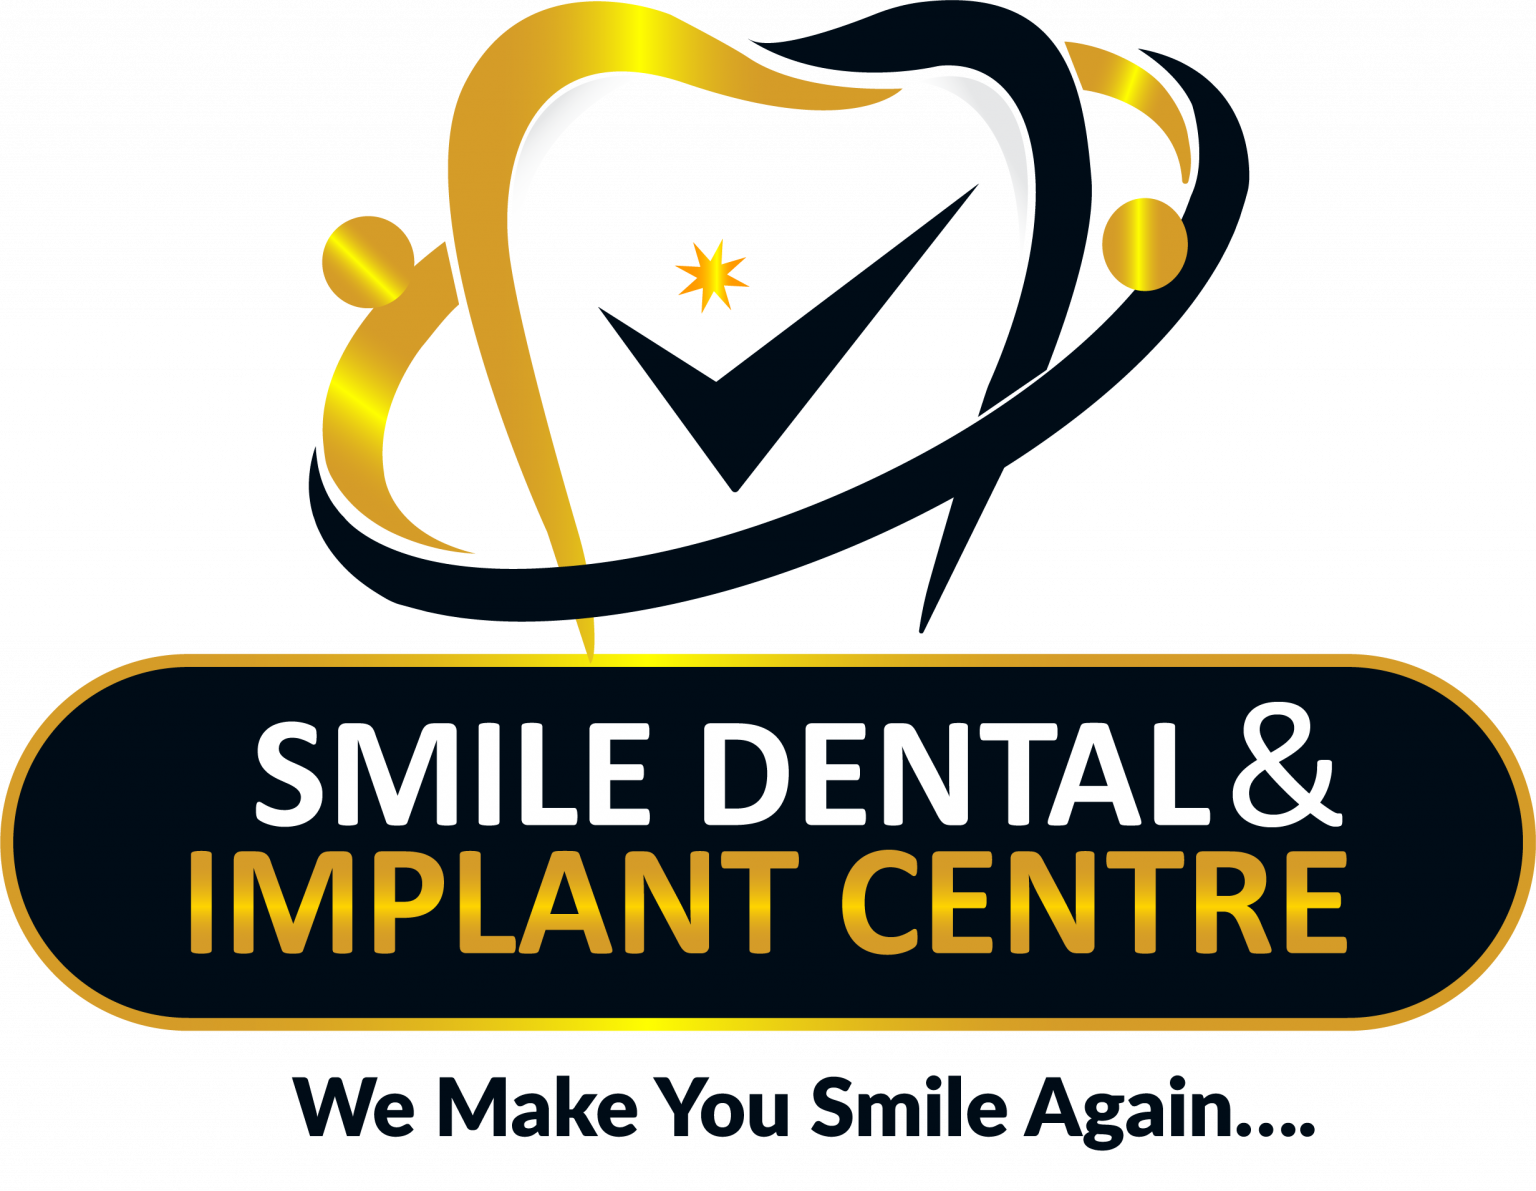 Smile Dental and Implant Centre|Healthcare|Medical Services